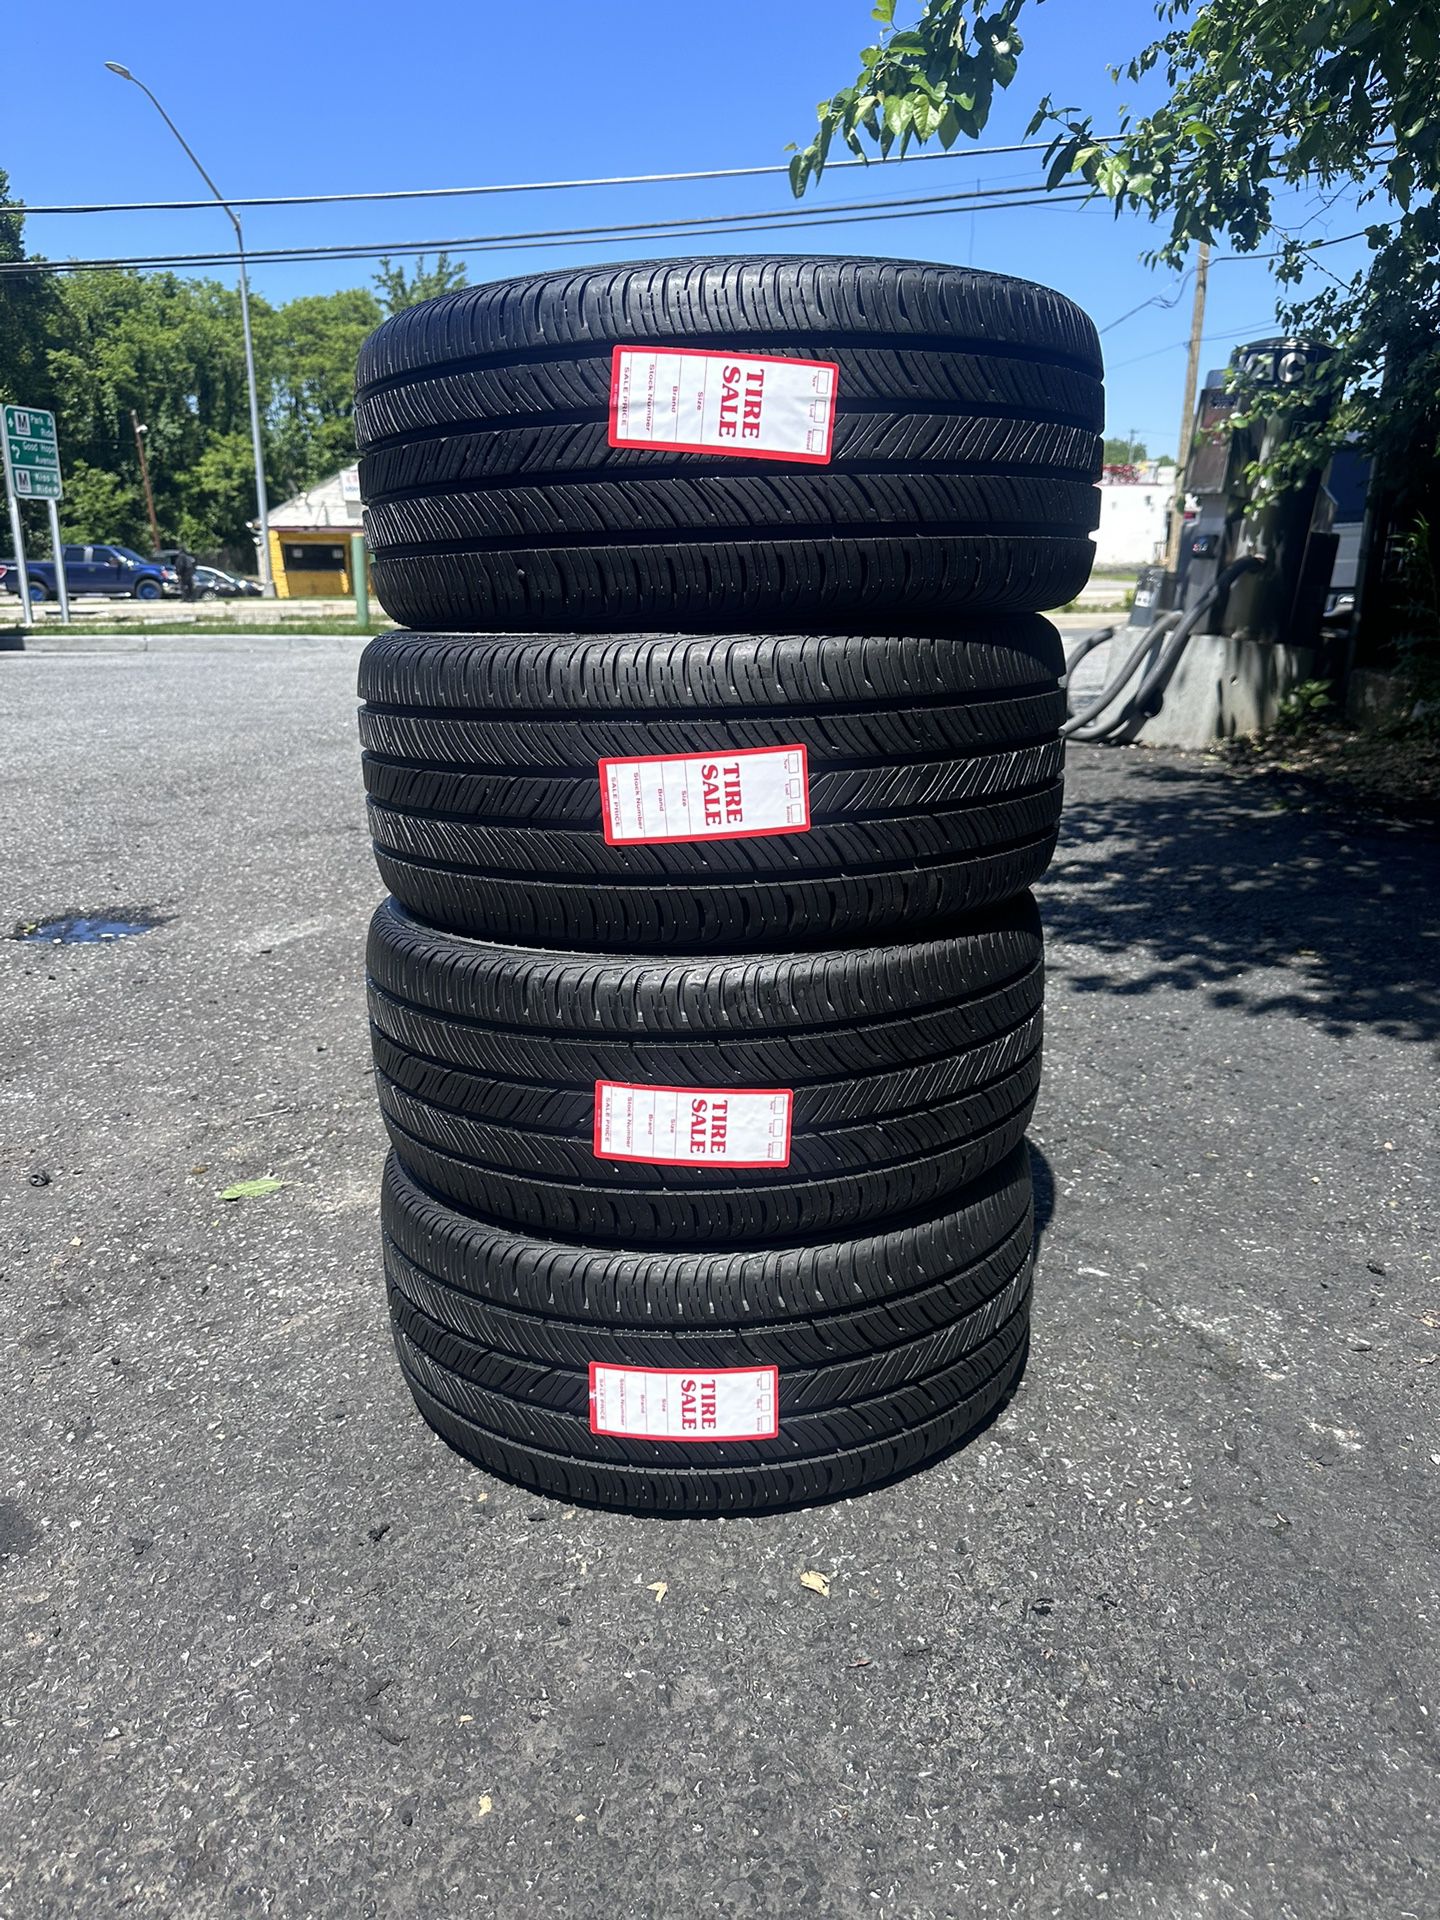 Four Continental Tires For Sale 